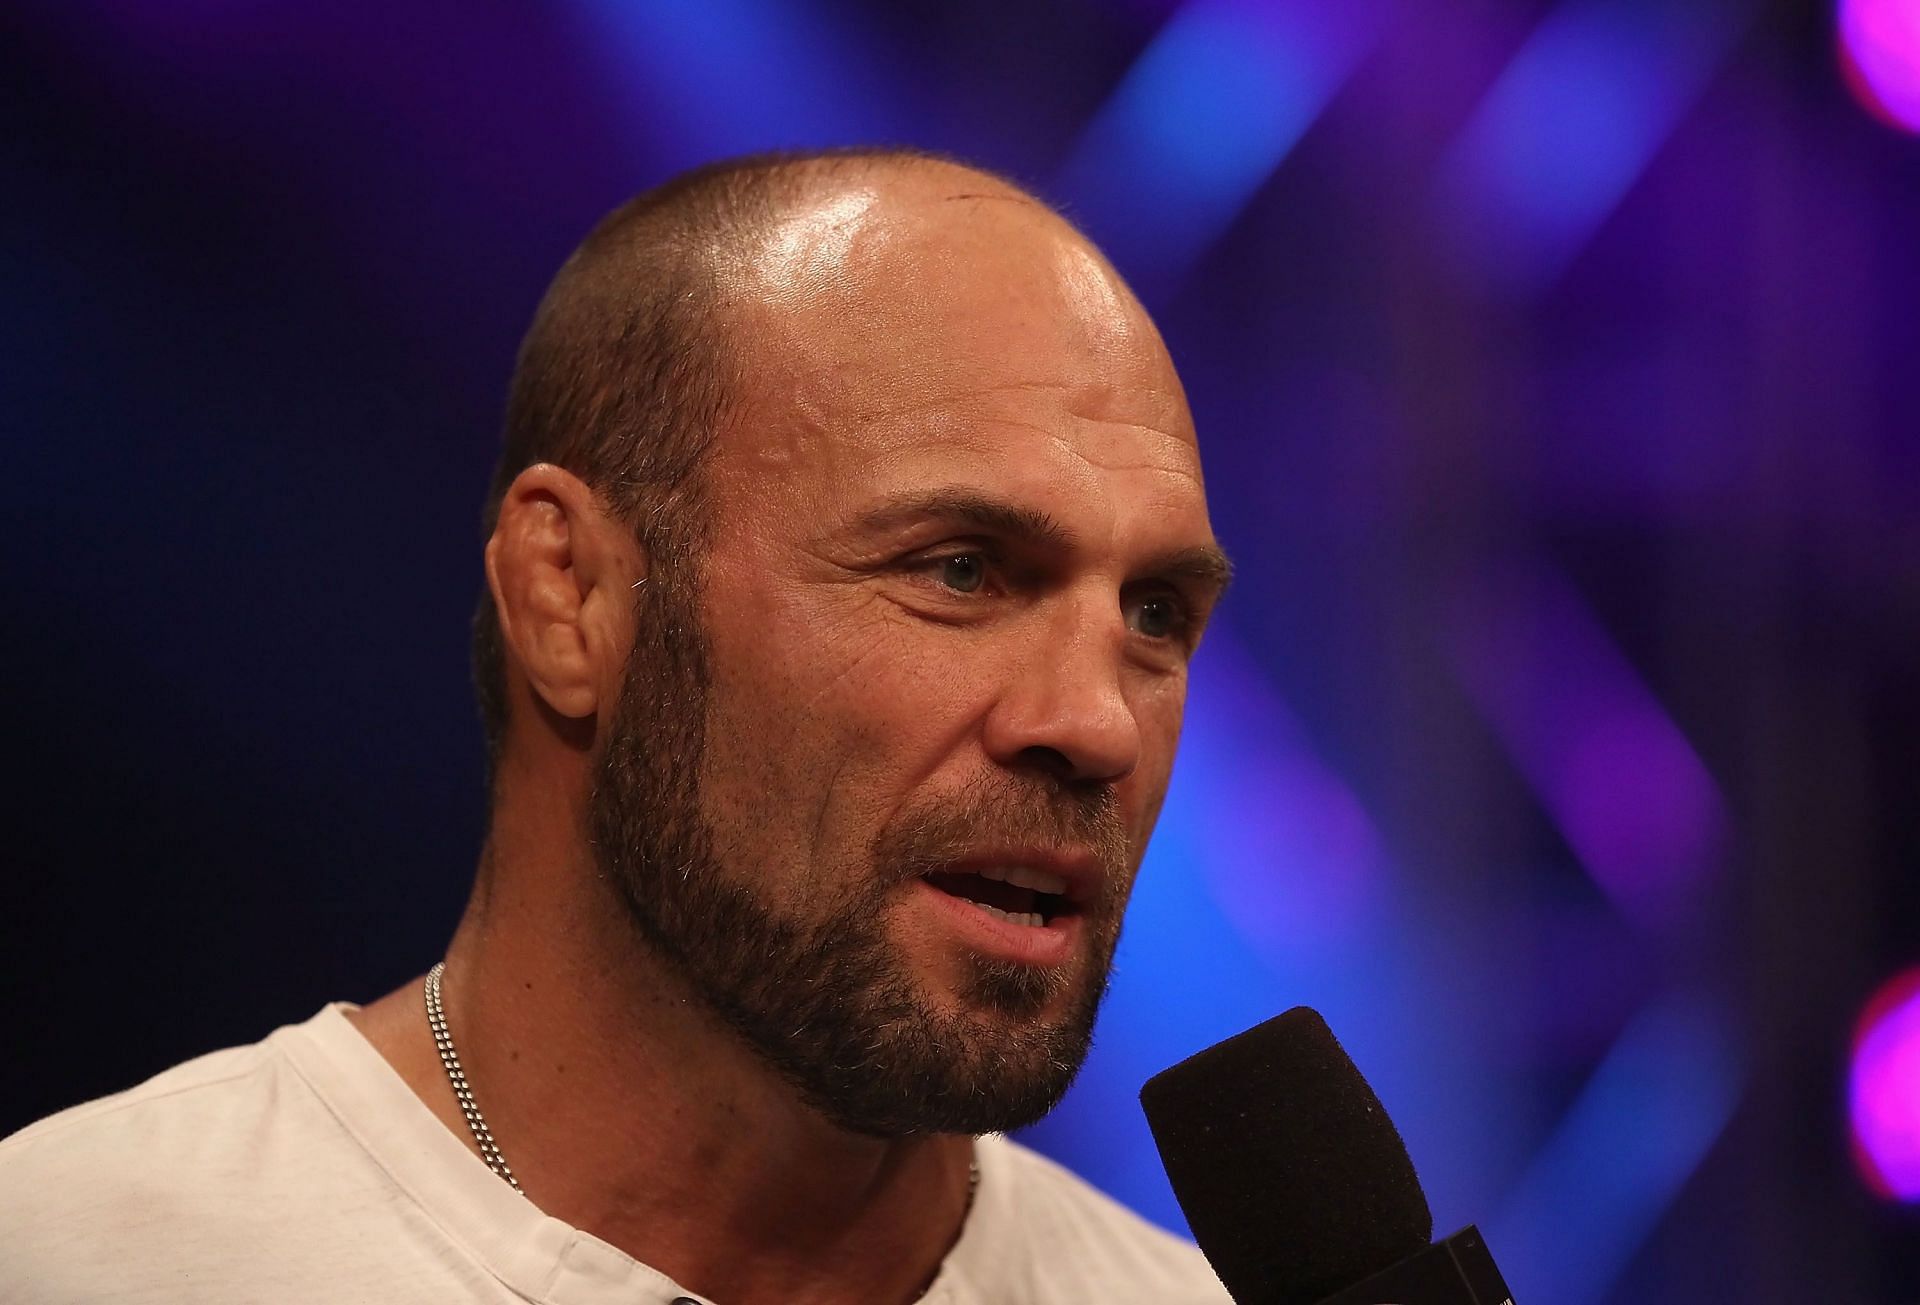 Randy Couture avenged his upset loss to Vitor Belfort to reclaim light-heavyweight gold